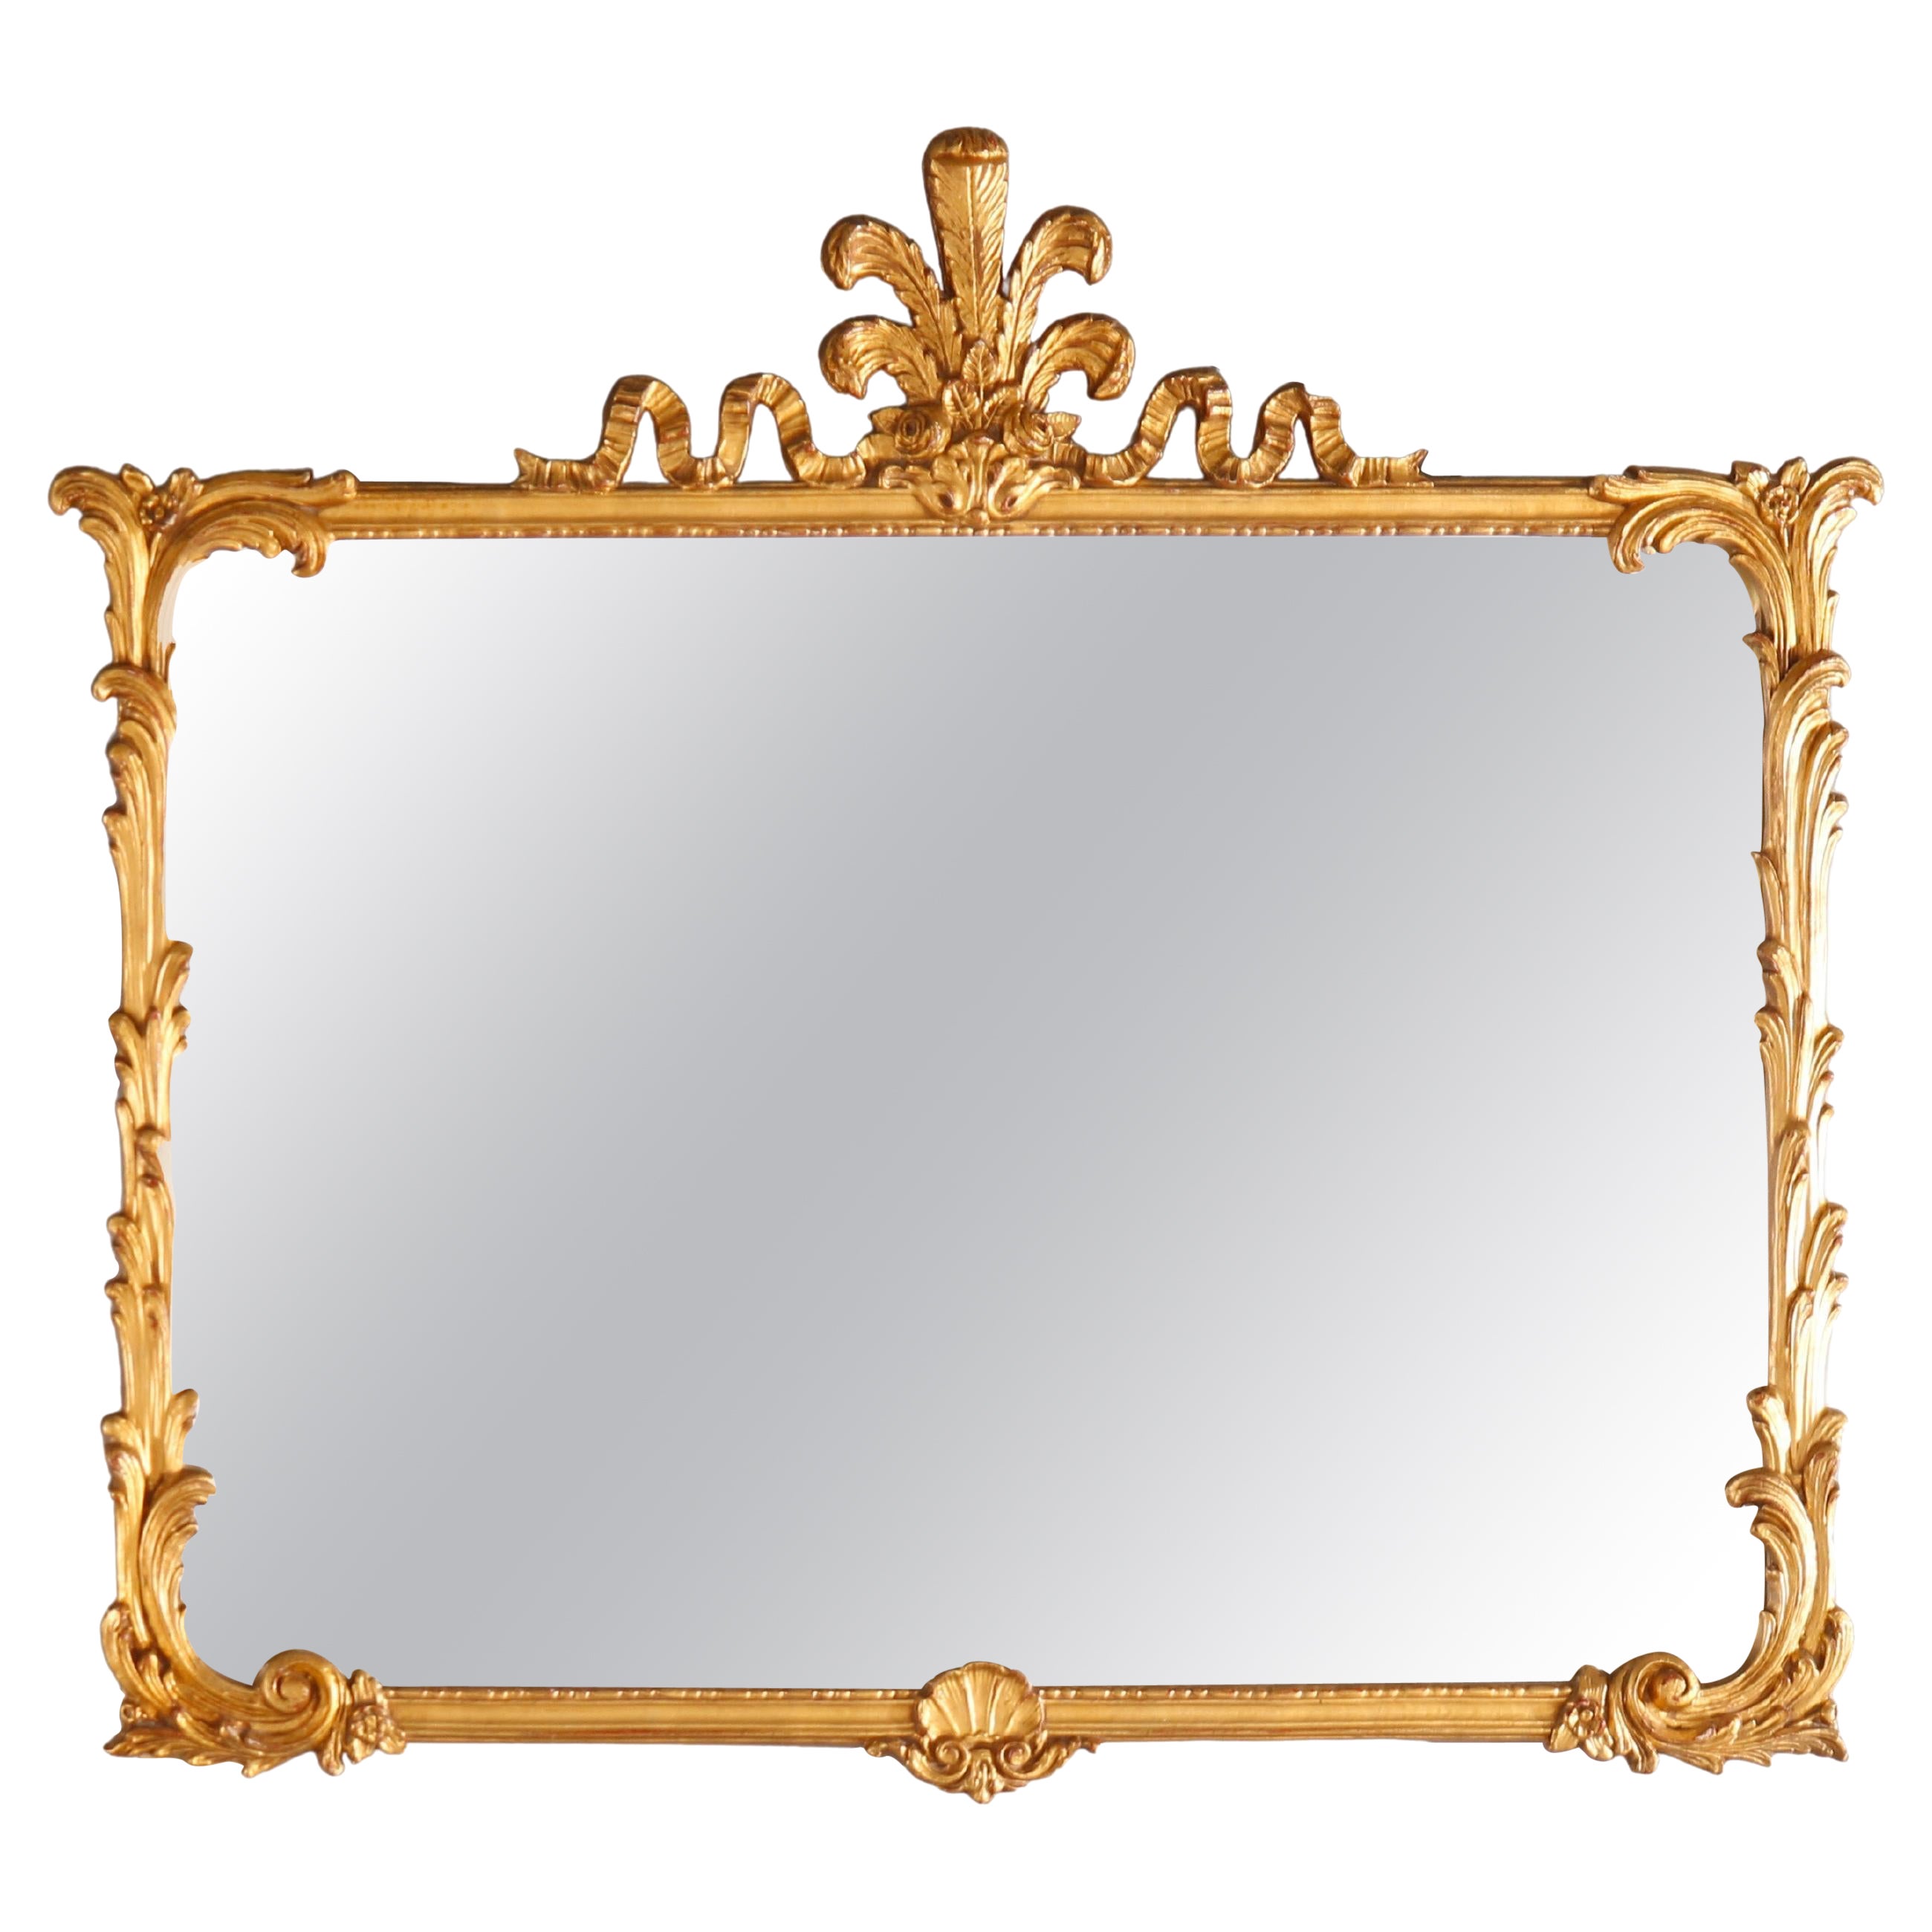 Antique French Style Giltwood Wall Mirror circa 1920